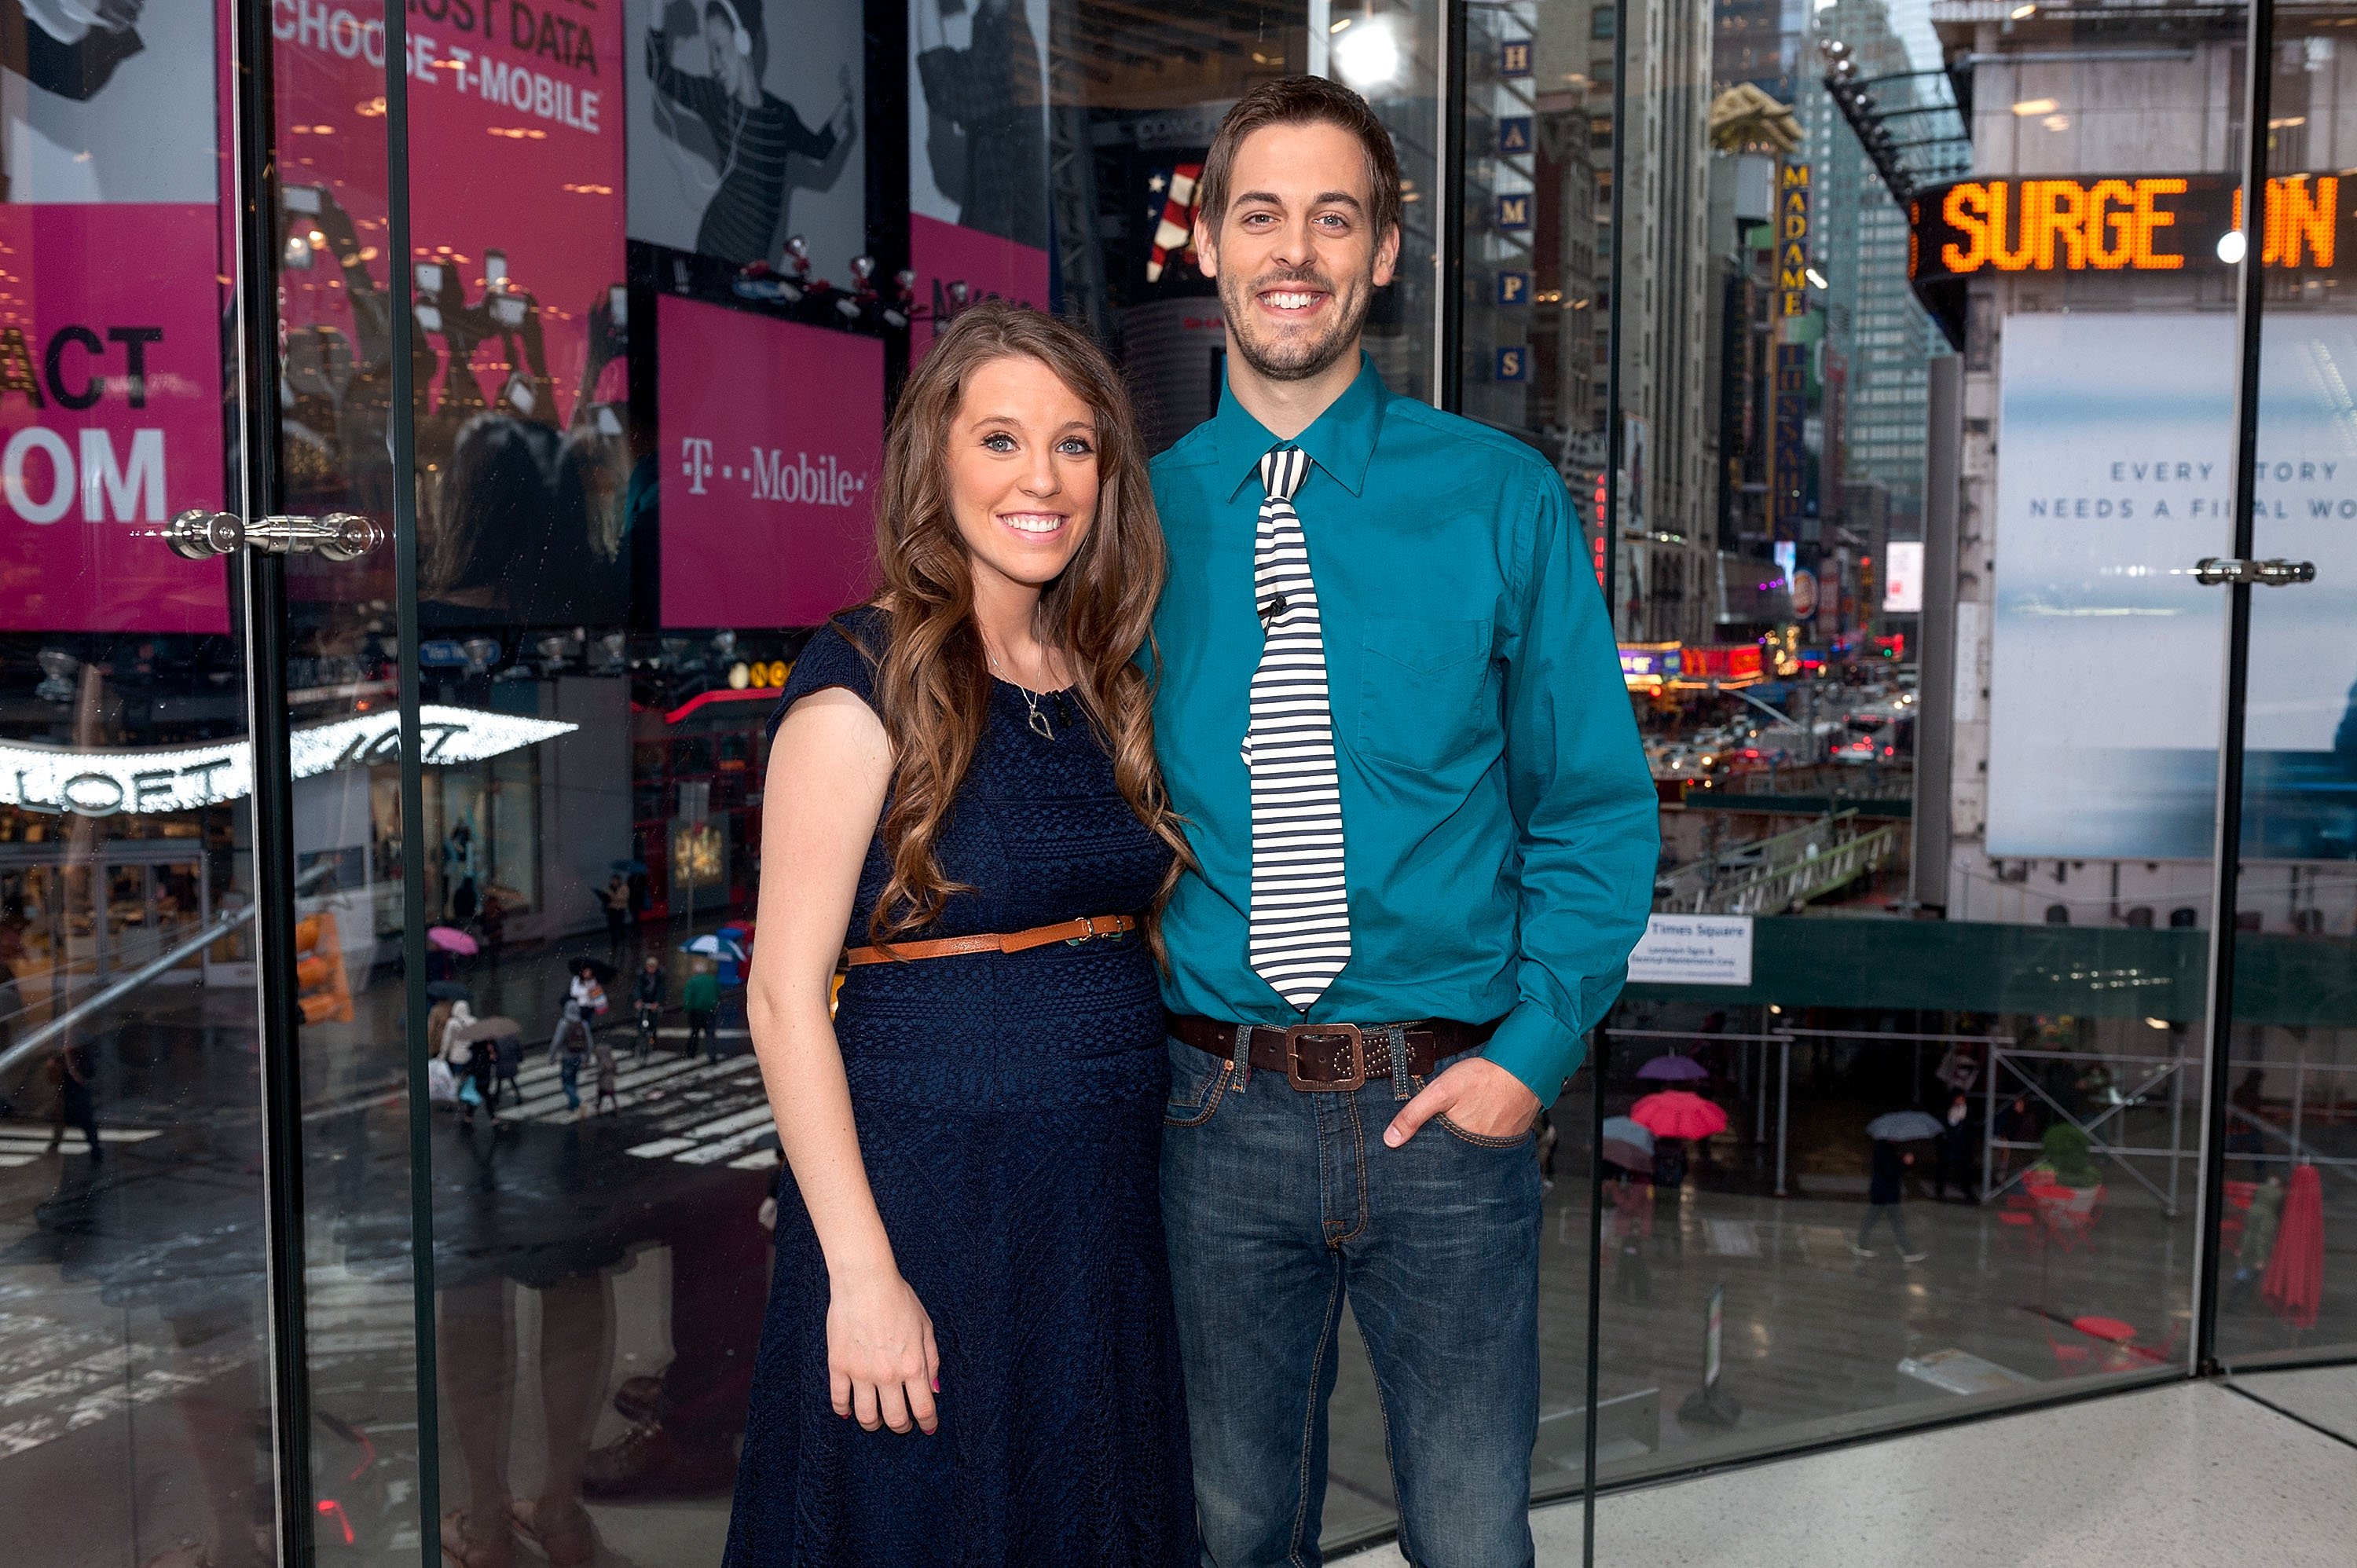 Jill Duggar Dillard and husband Derick Dillard visit "Extra" in Times Square on October 23, 2014 in New York City | Photo: Getty Images